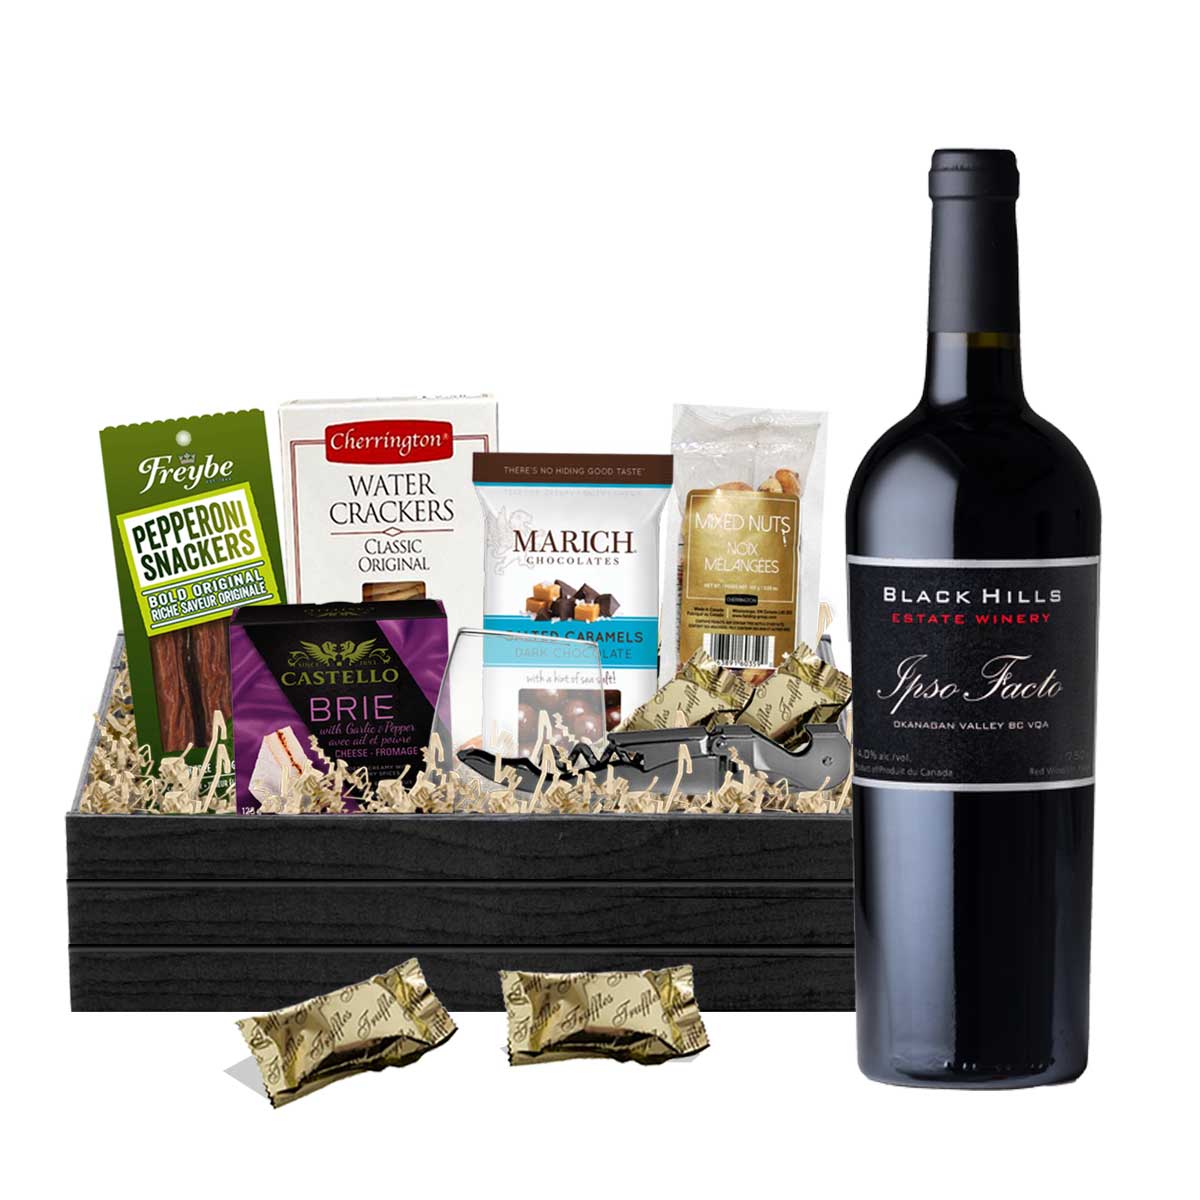 TAG Liquor Stores BC - Black Hills Winery Ipso Facto Red Blend 750ml Gift Basket